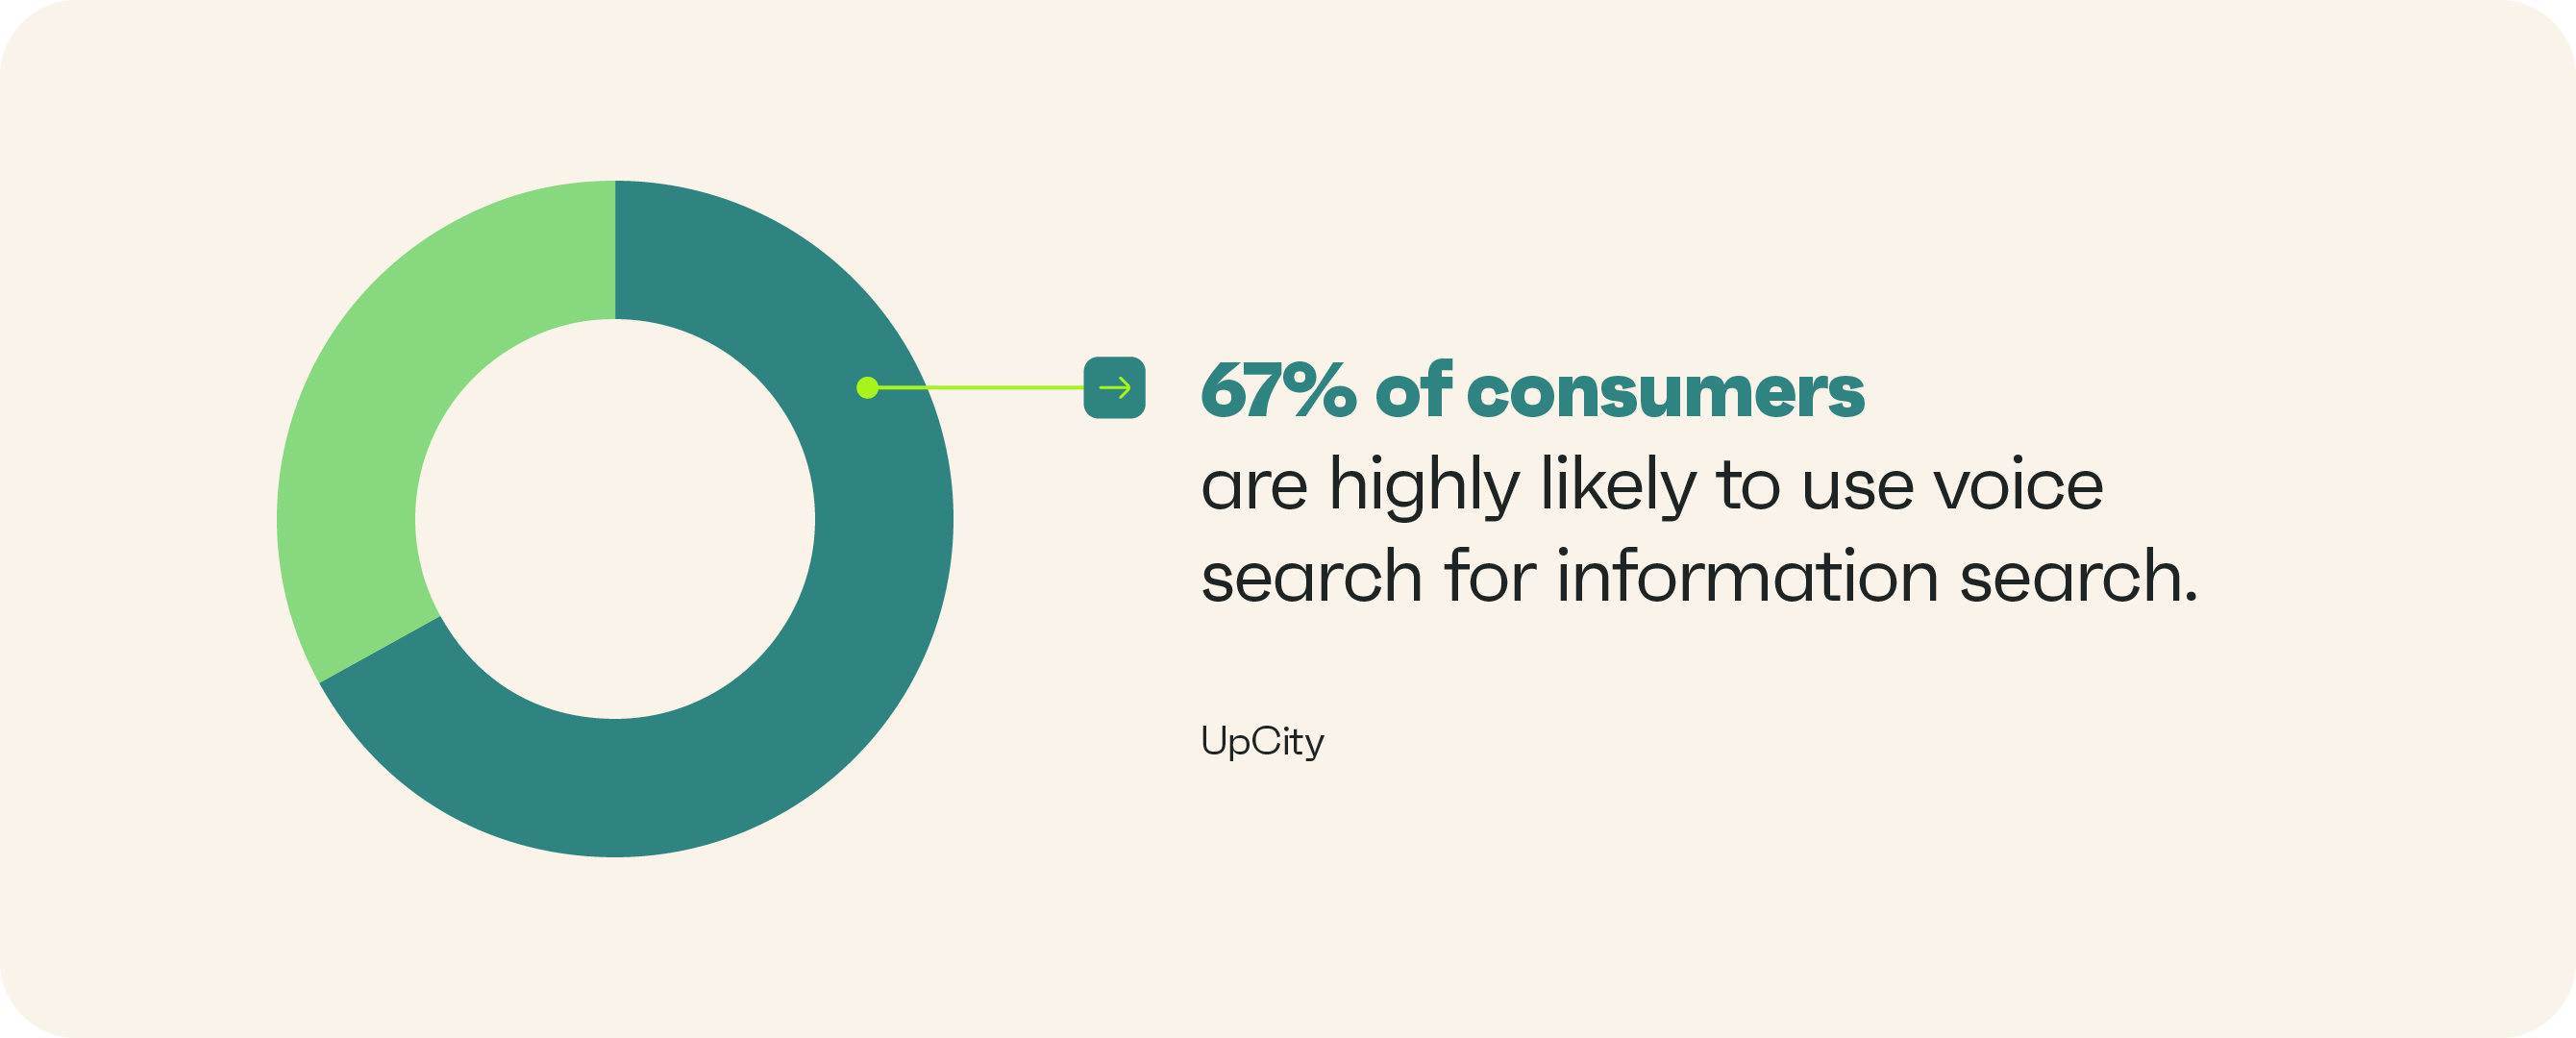 67% of consumers are highly likely to use voice search for information search